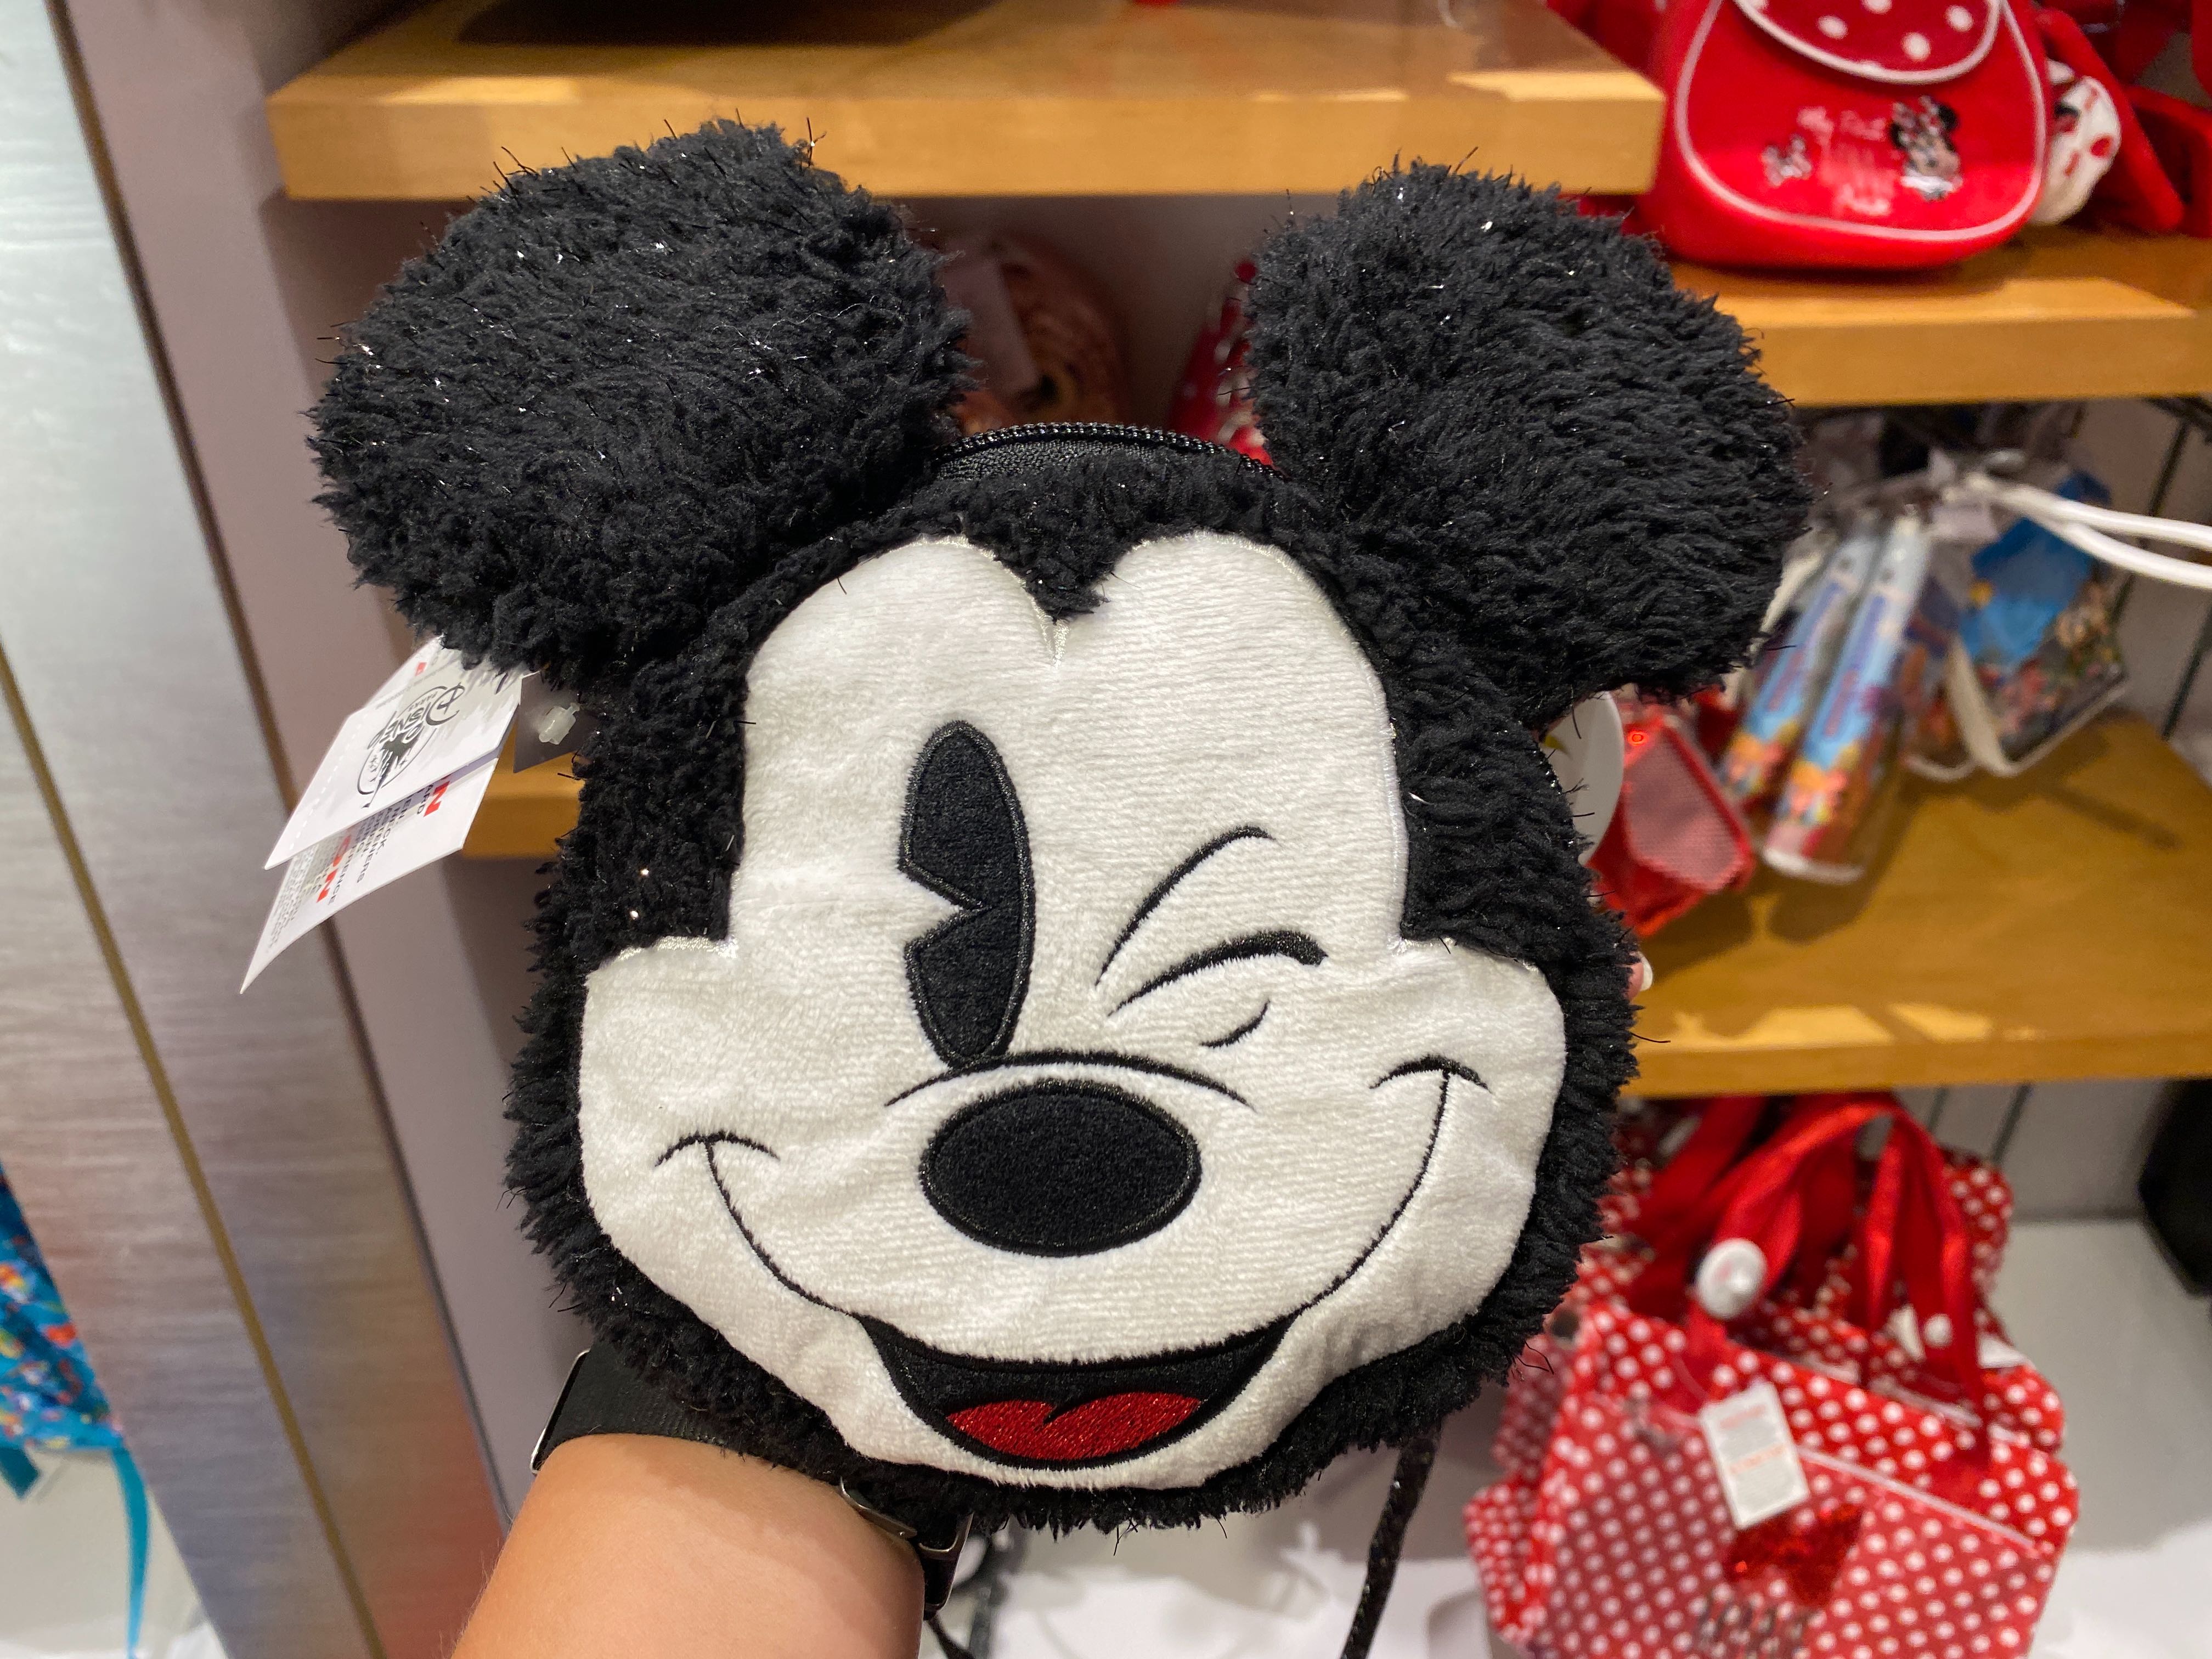 PHOTOS: Snuggle Up With These NEW Mickey & Minnie Mouse Plush Purses at  Walt Disney World - Disneyland News Today